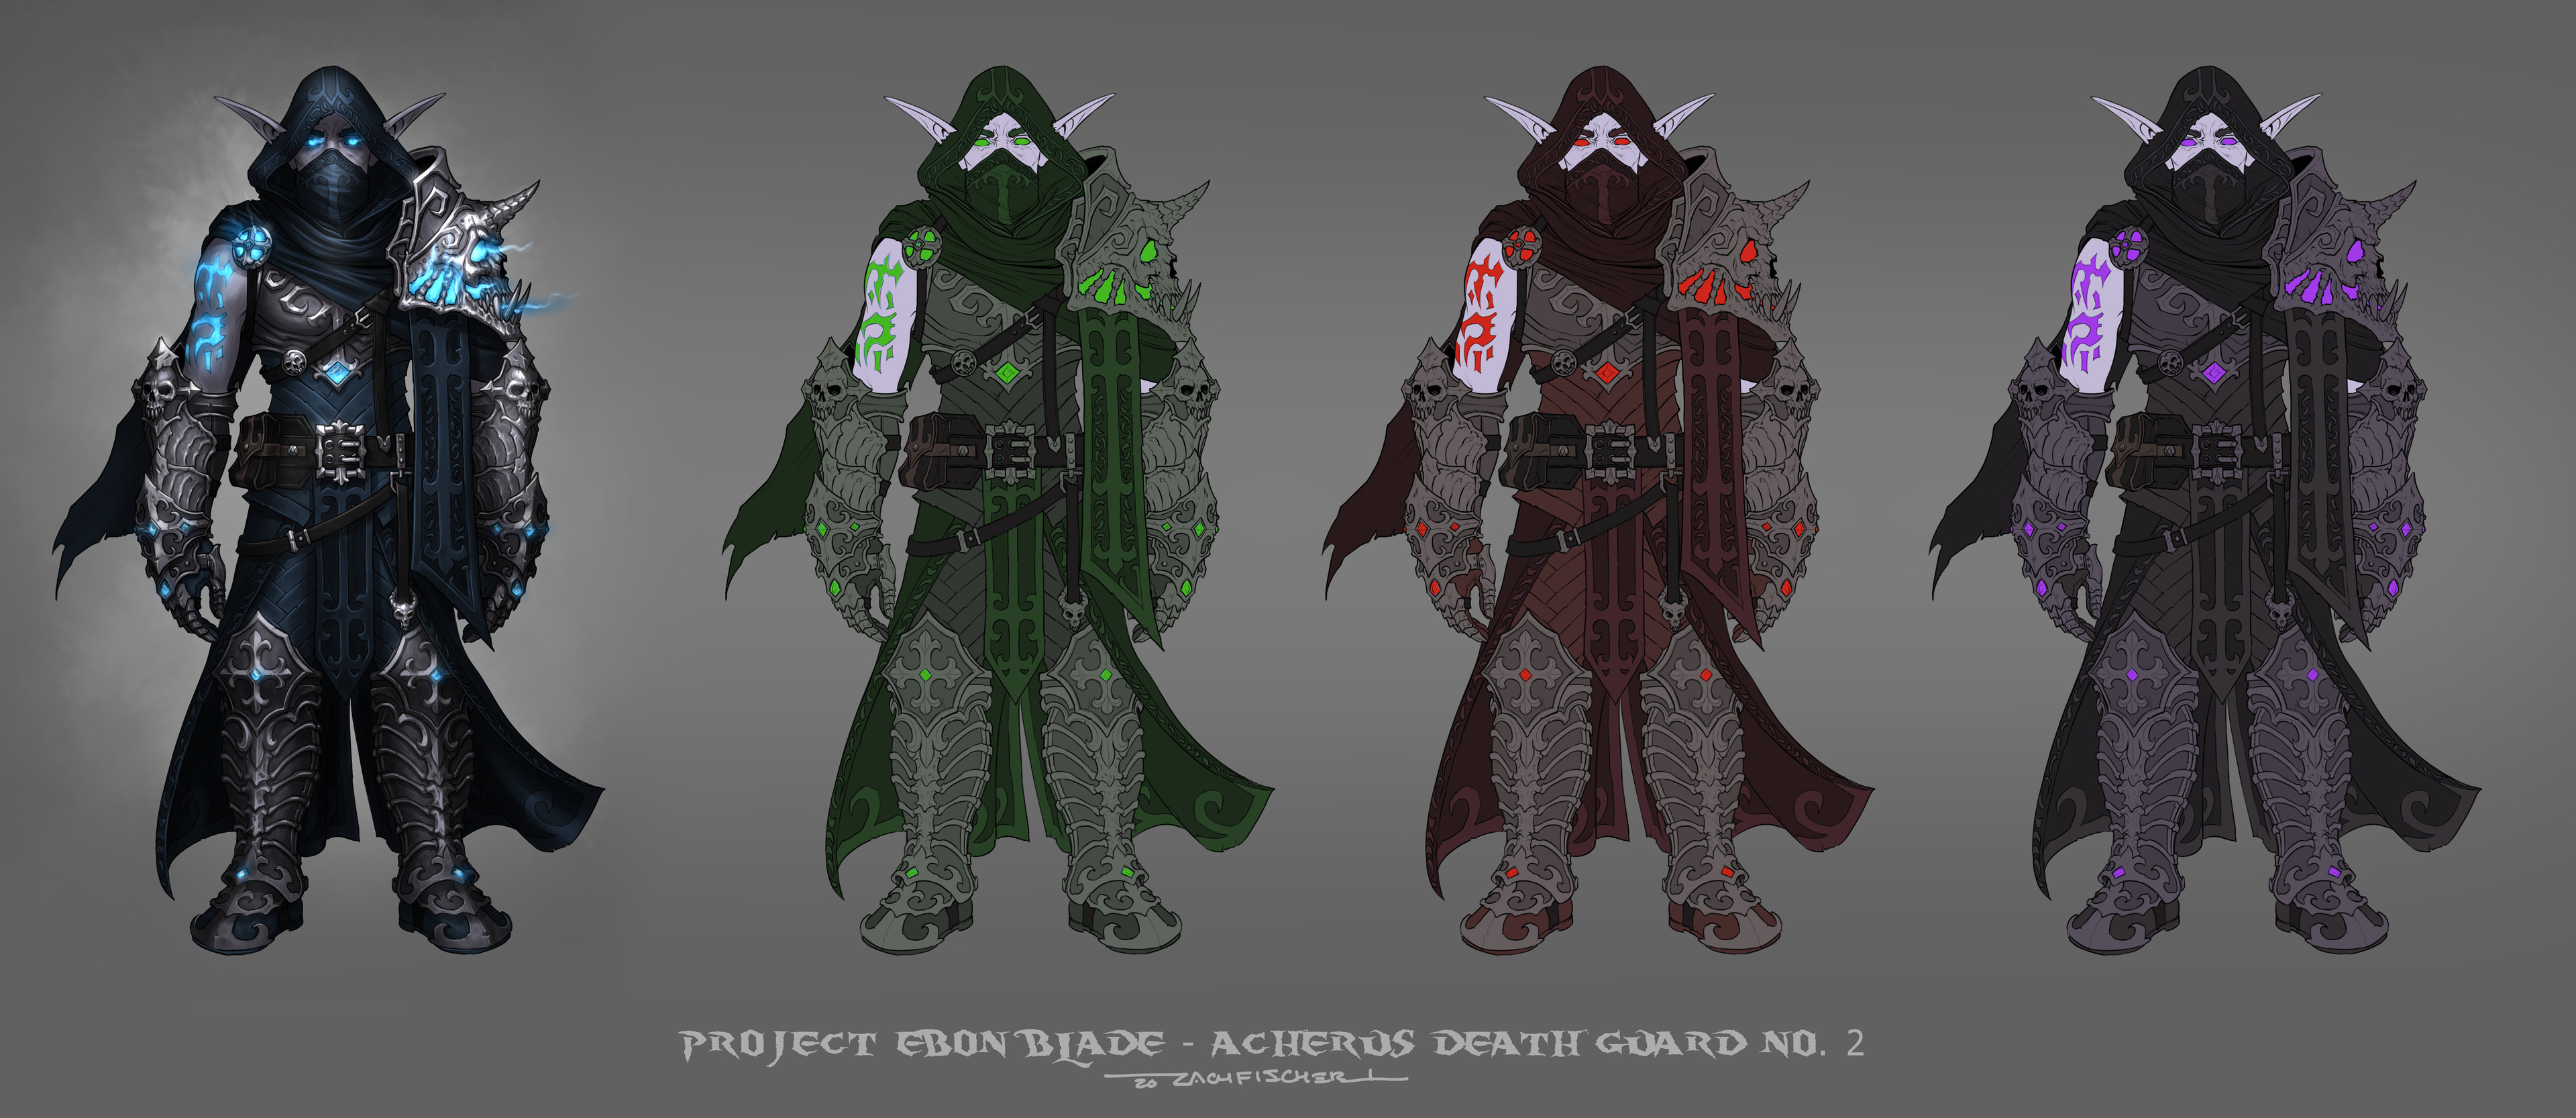 Deathguard Assassin (original armor concept)

The four Deathguard designs were created to allow for original characters and exemplified various armor styles. They were meant to be mixed and matched and customized to the cosplayers tastes. 